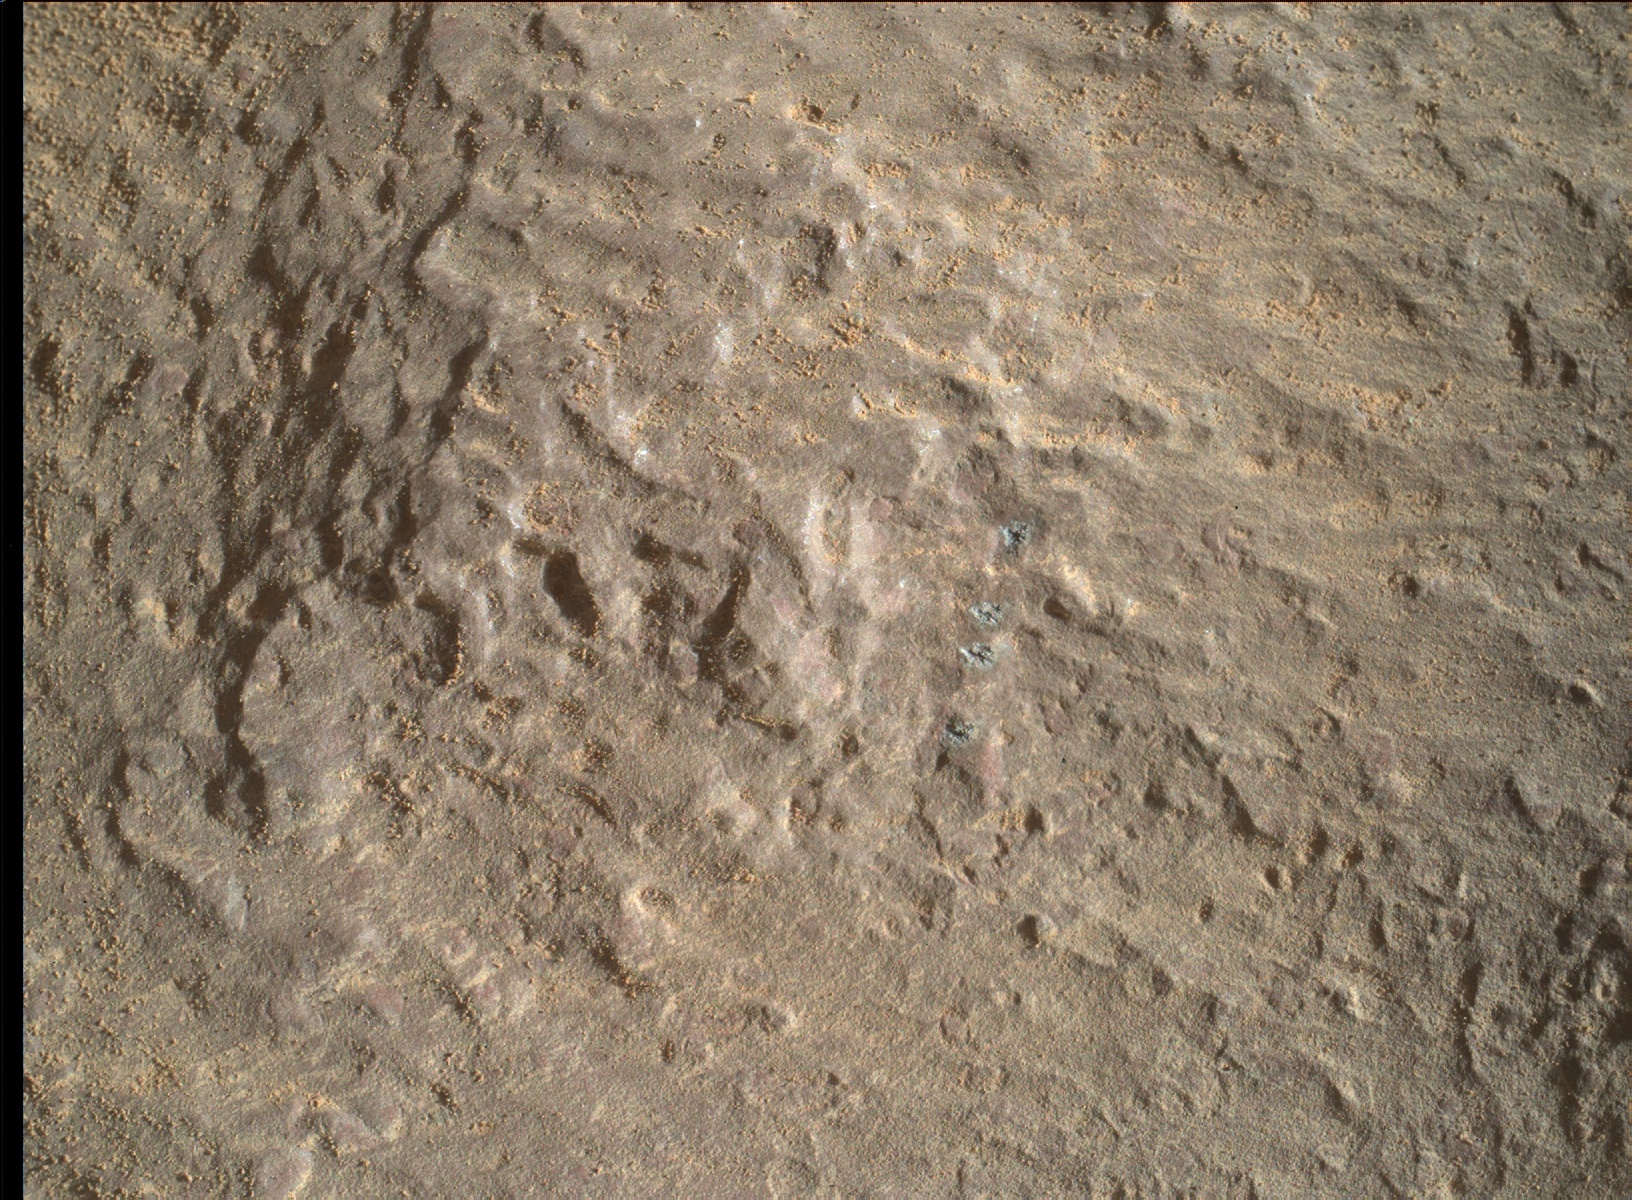 Nasa's Mars rover Curiosity acquired this image using its Mars Hand Lens Imager (MAHLI) on Sol 1254